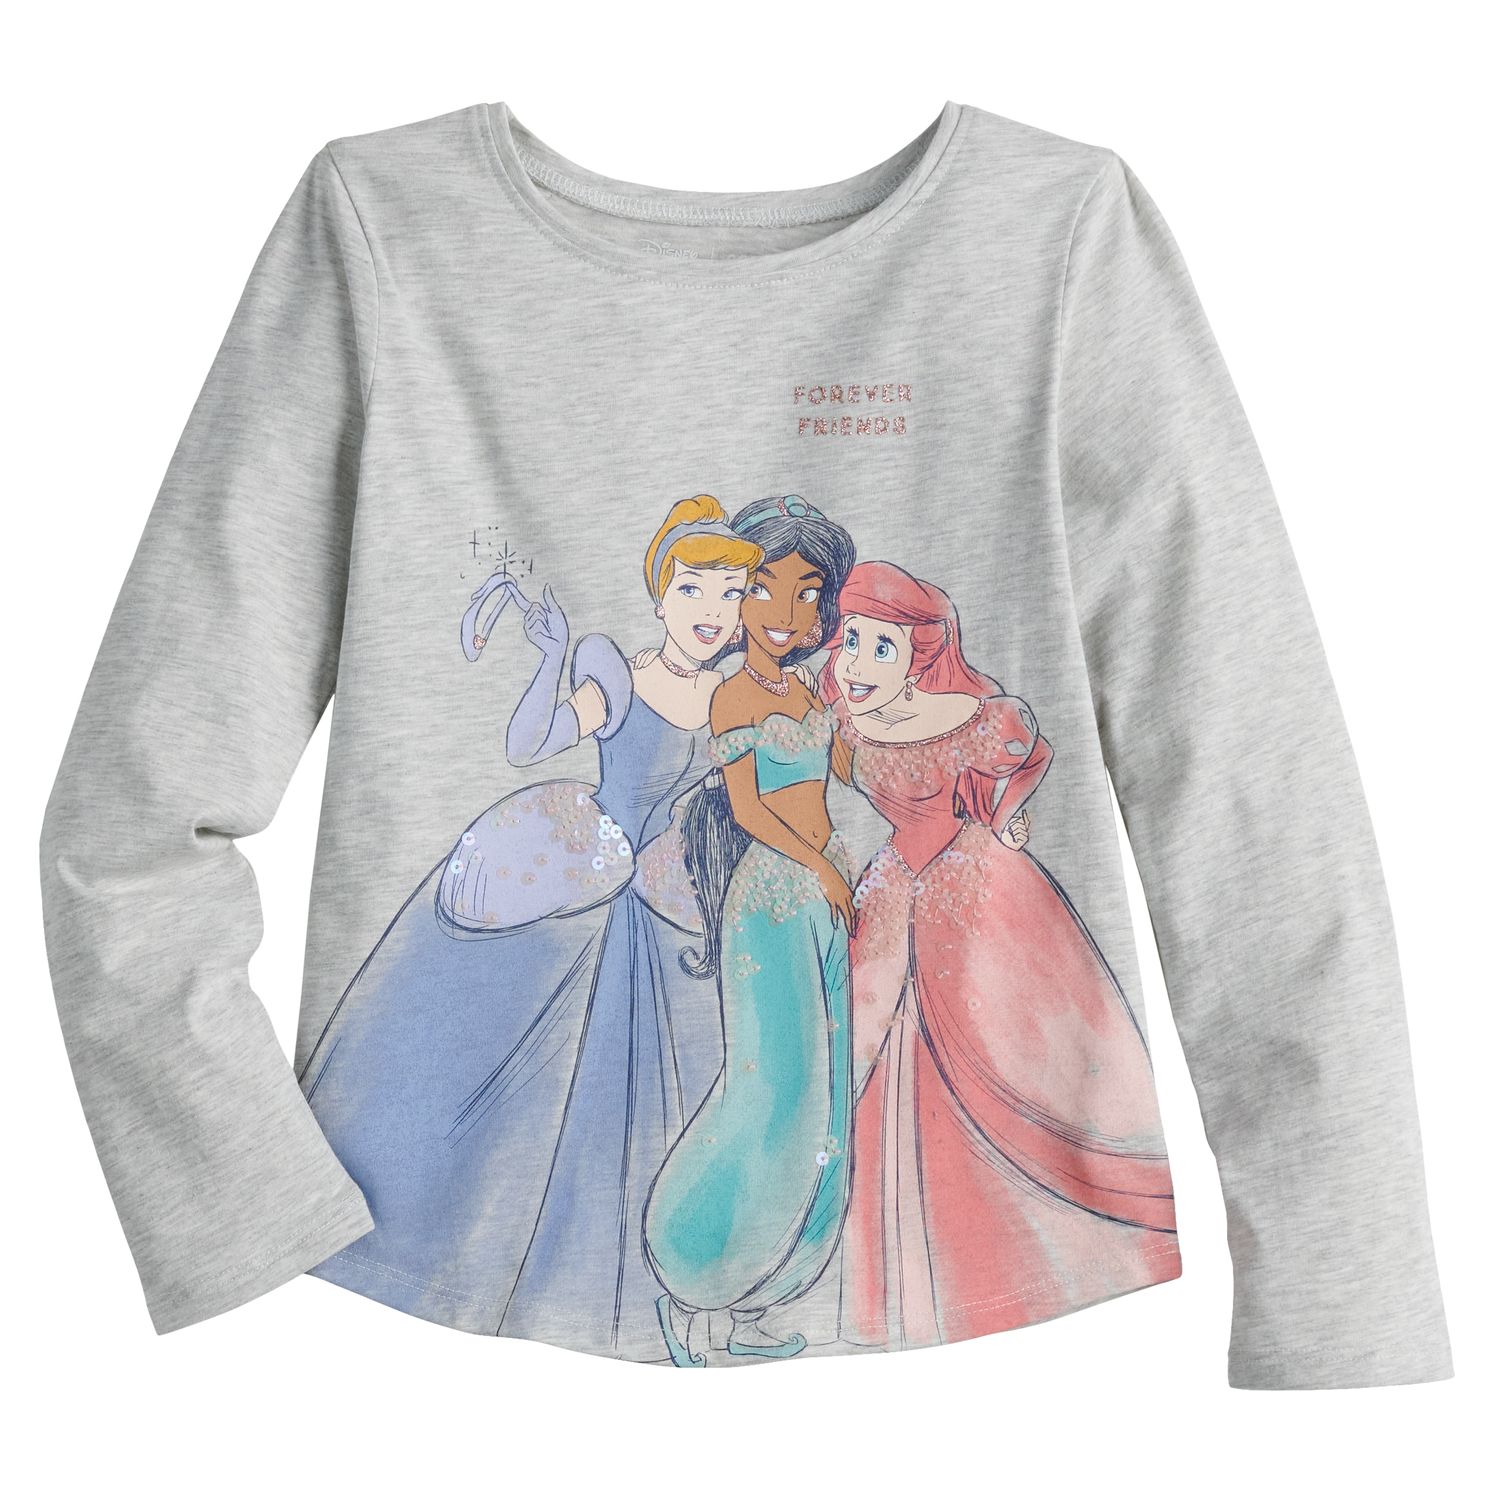 Image for Disney/Jumping Beans Disney's The Beauty And The Beast Belle Girls 4-12 Graphic Tee by Jumping Beans® at Kohl's.